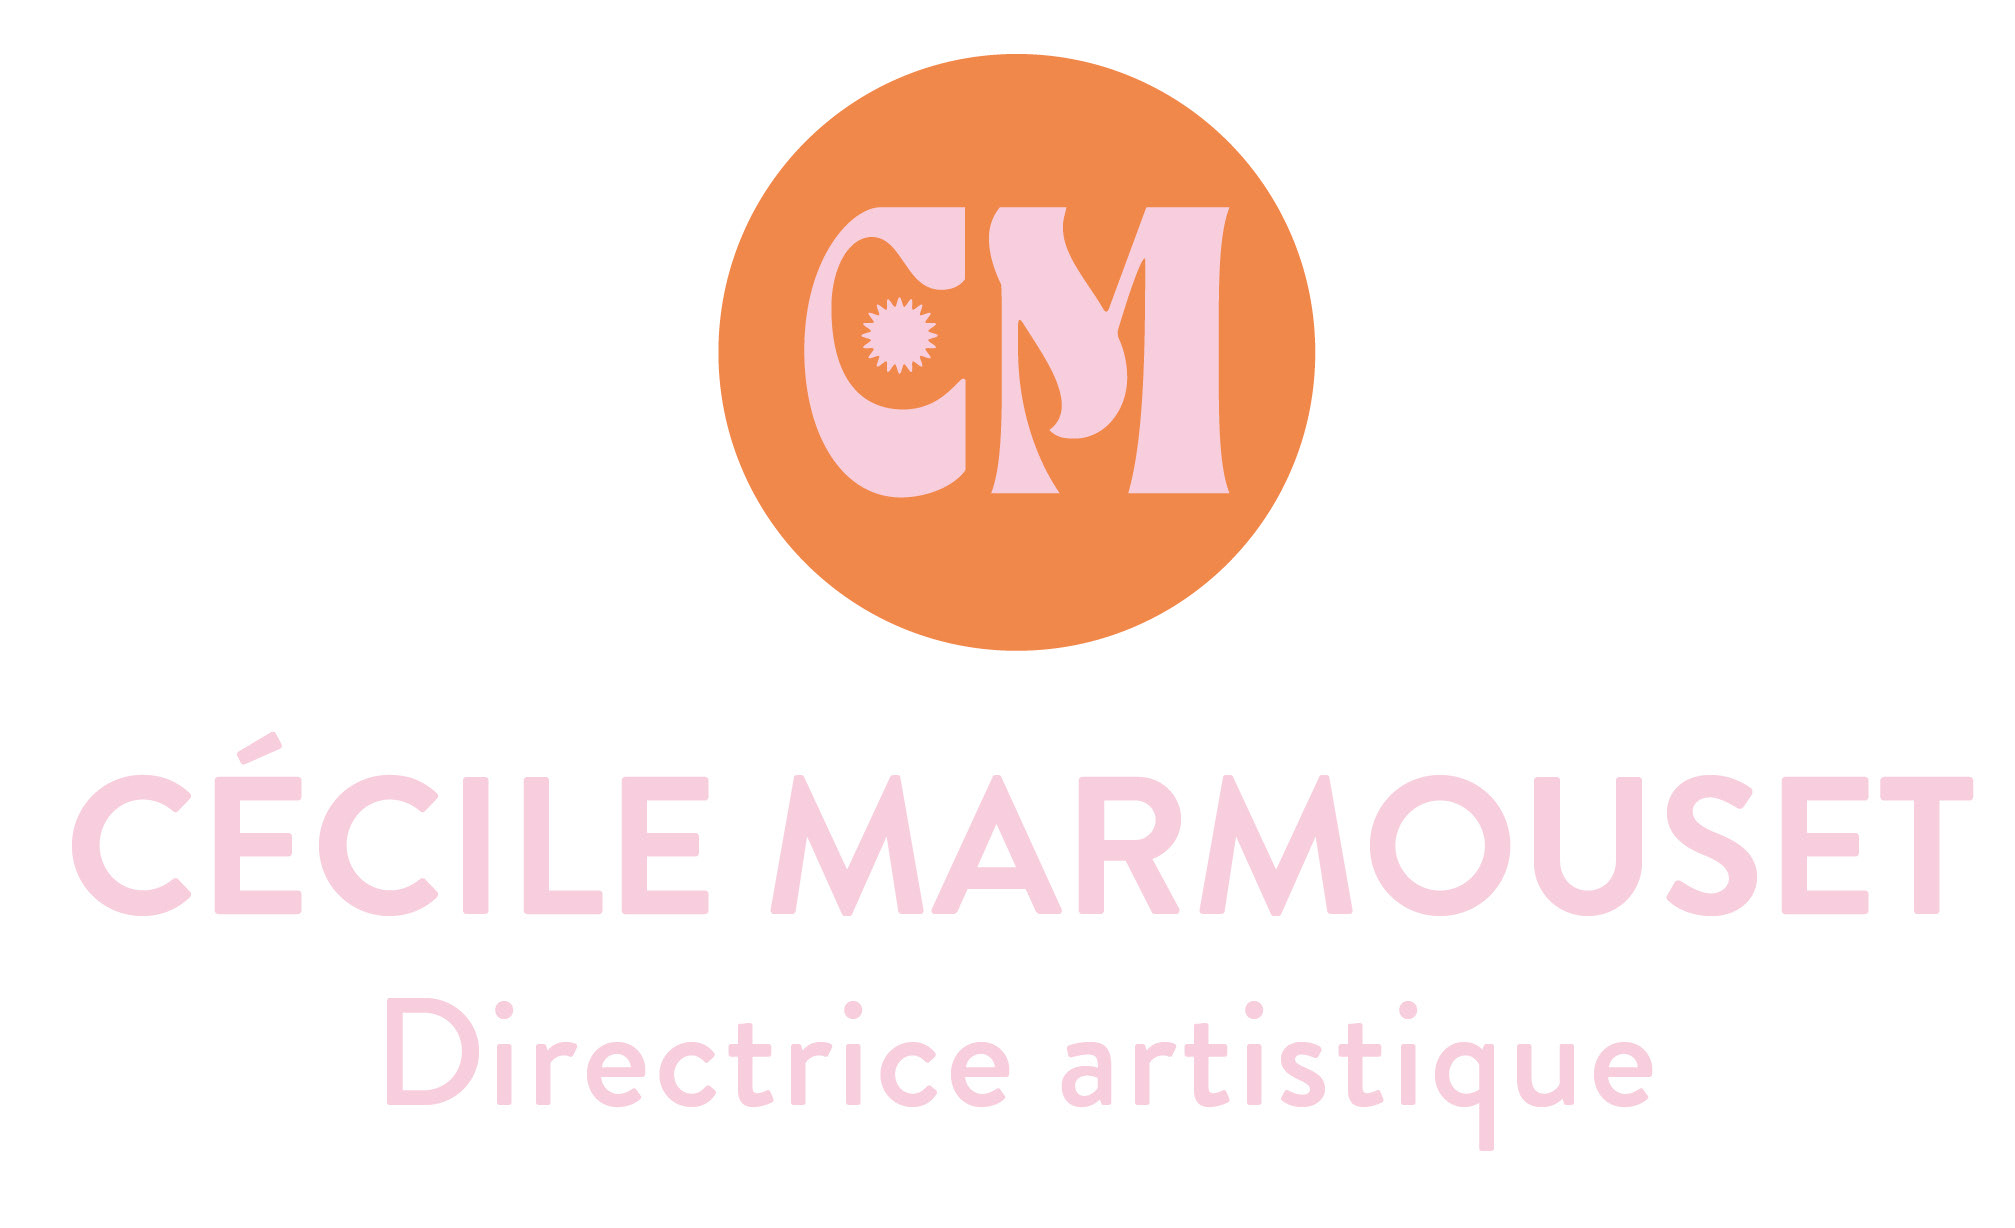 cecile marmouset